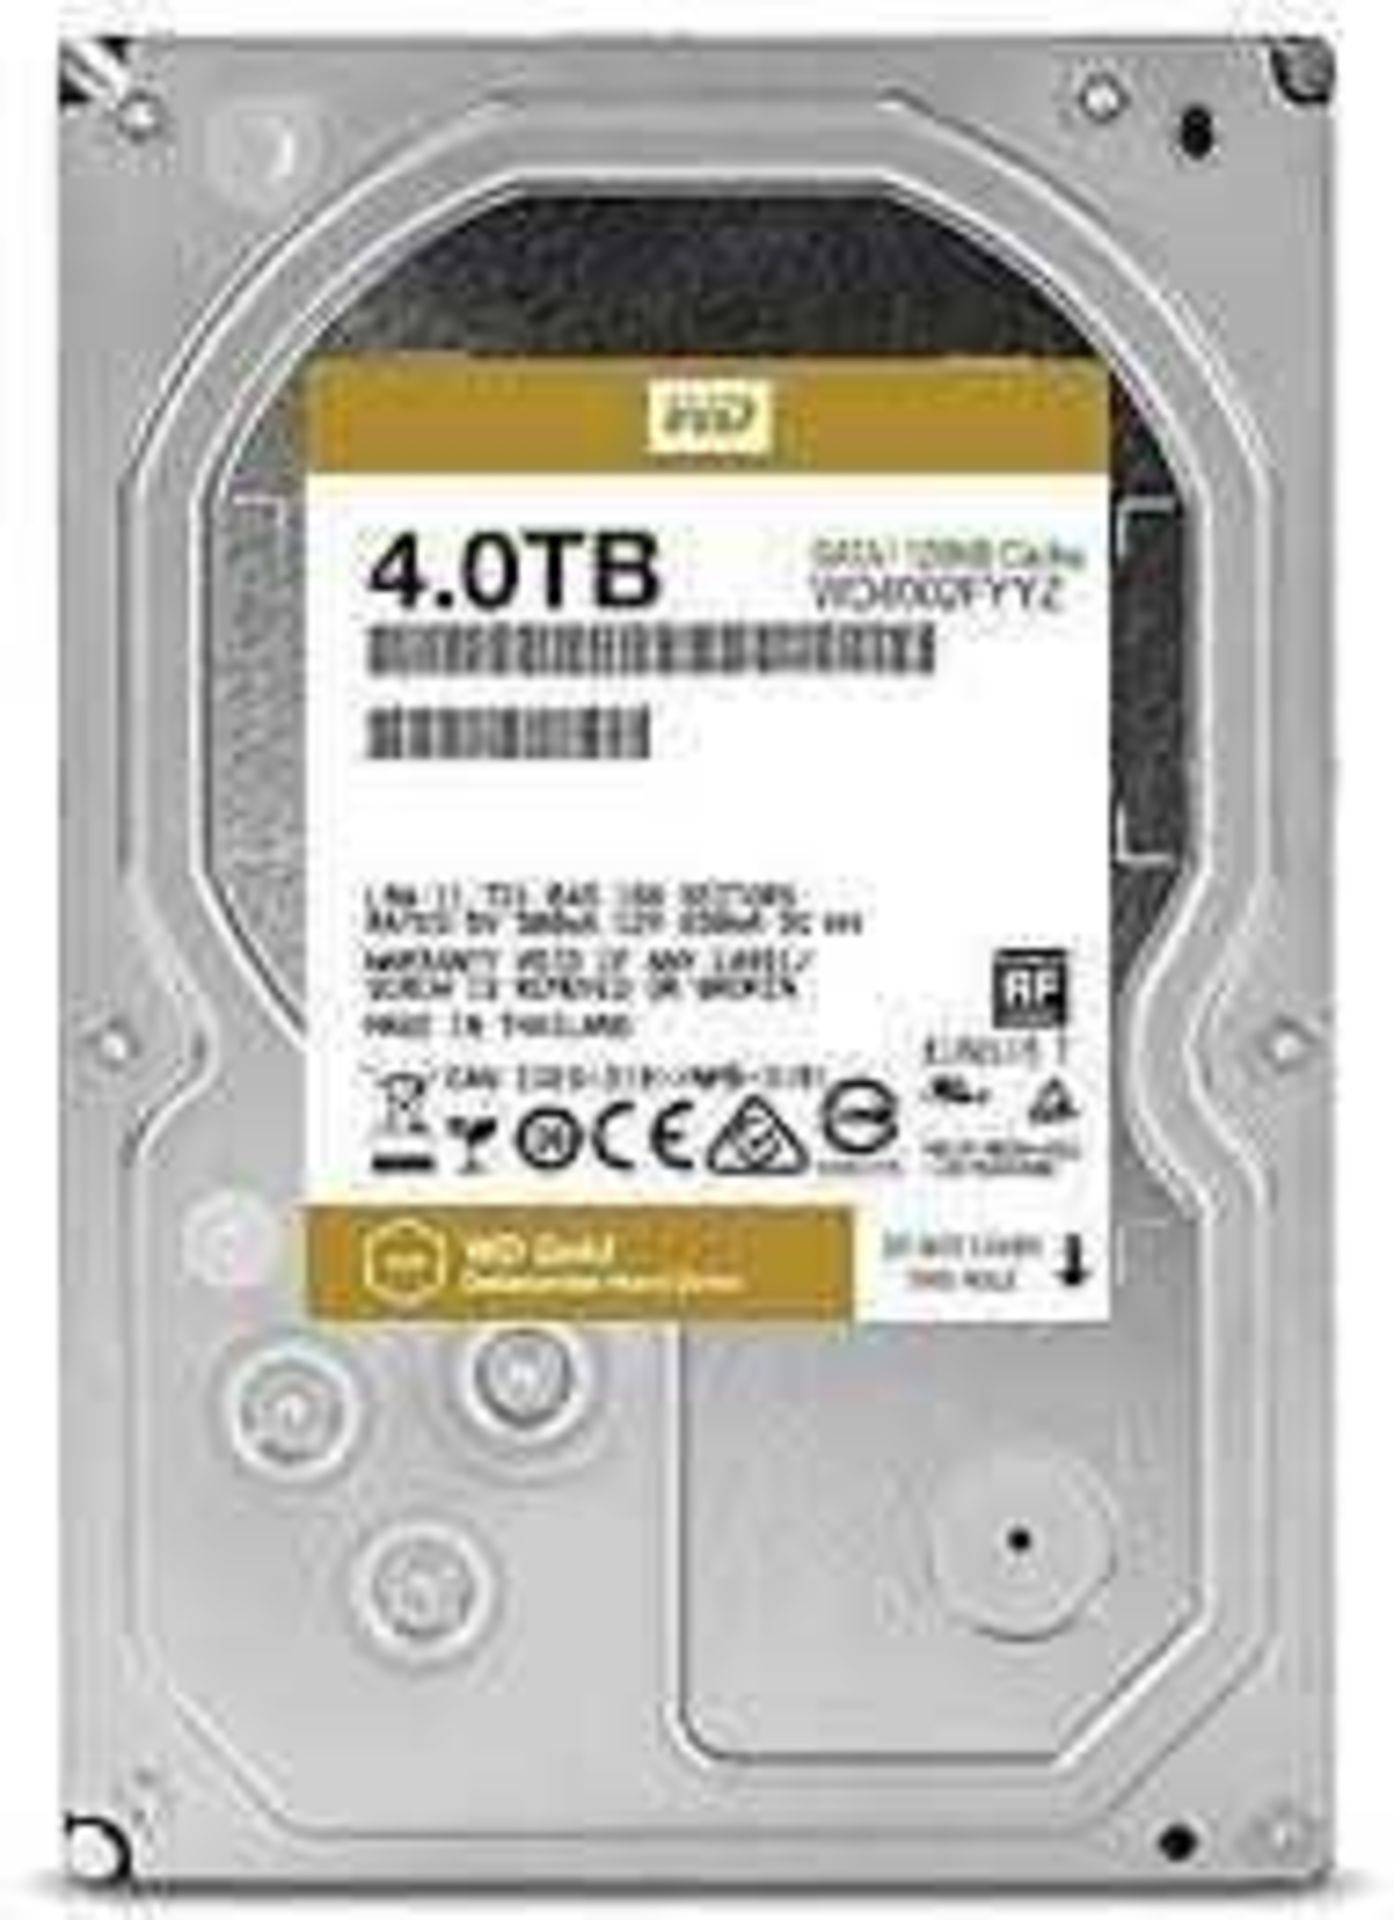 RRP £130 Brand New Western Digital Naswear 3.0 4Tb Internal Hard Drive (Appraisals Available On